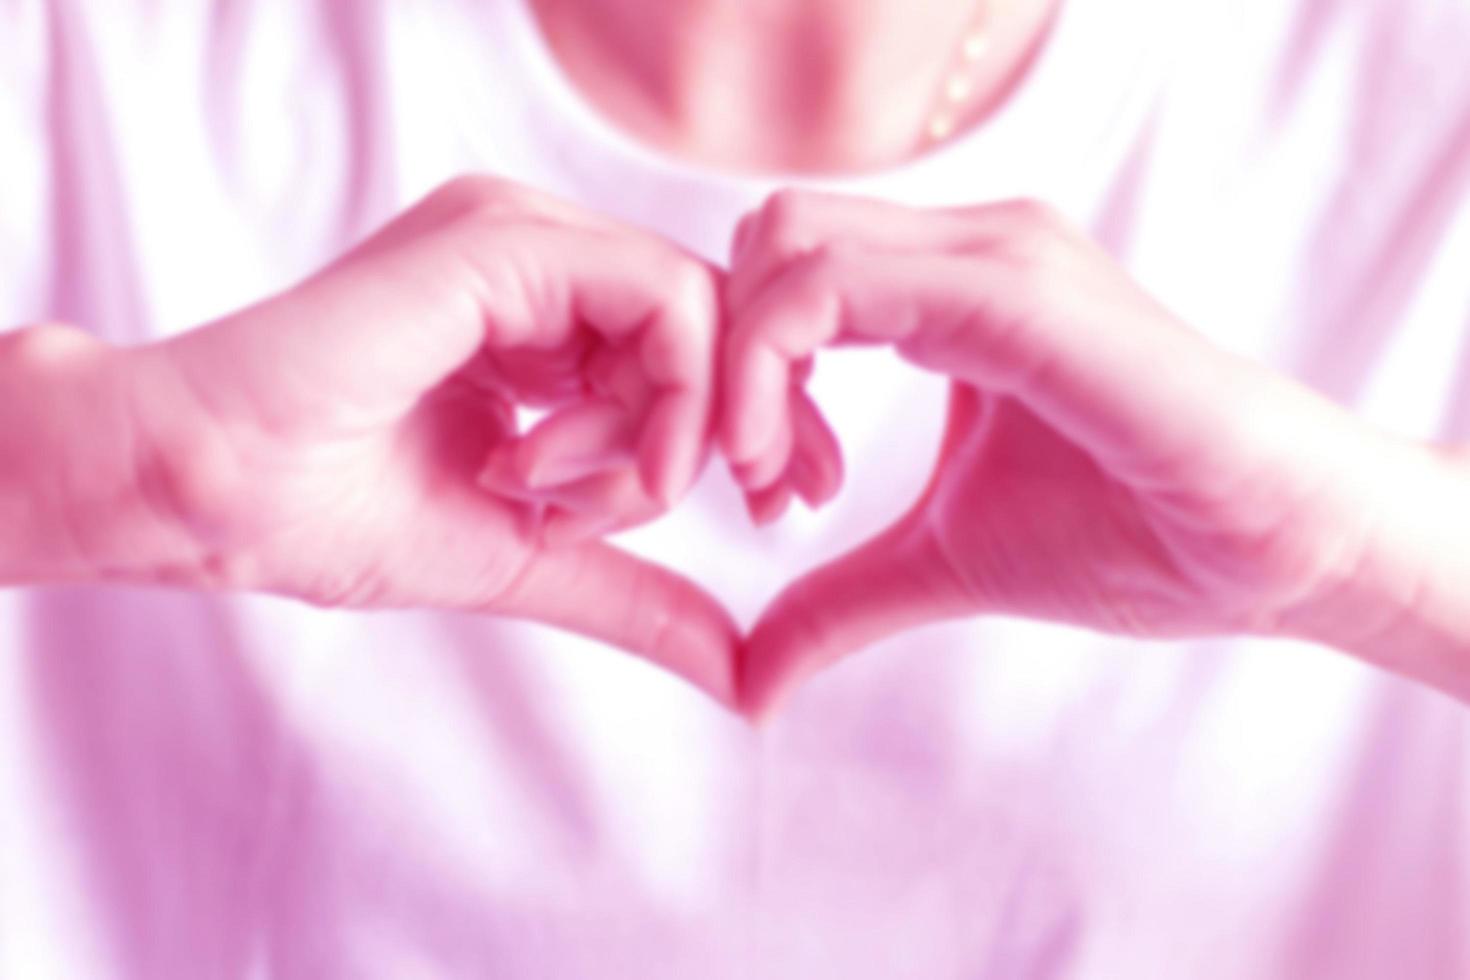 Blurry image of hand signs to be heart shape, showing love in pink color tone photo. photo